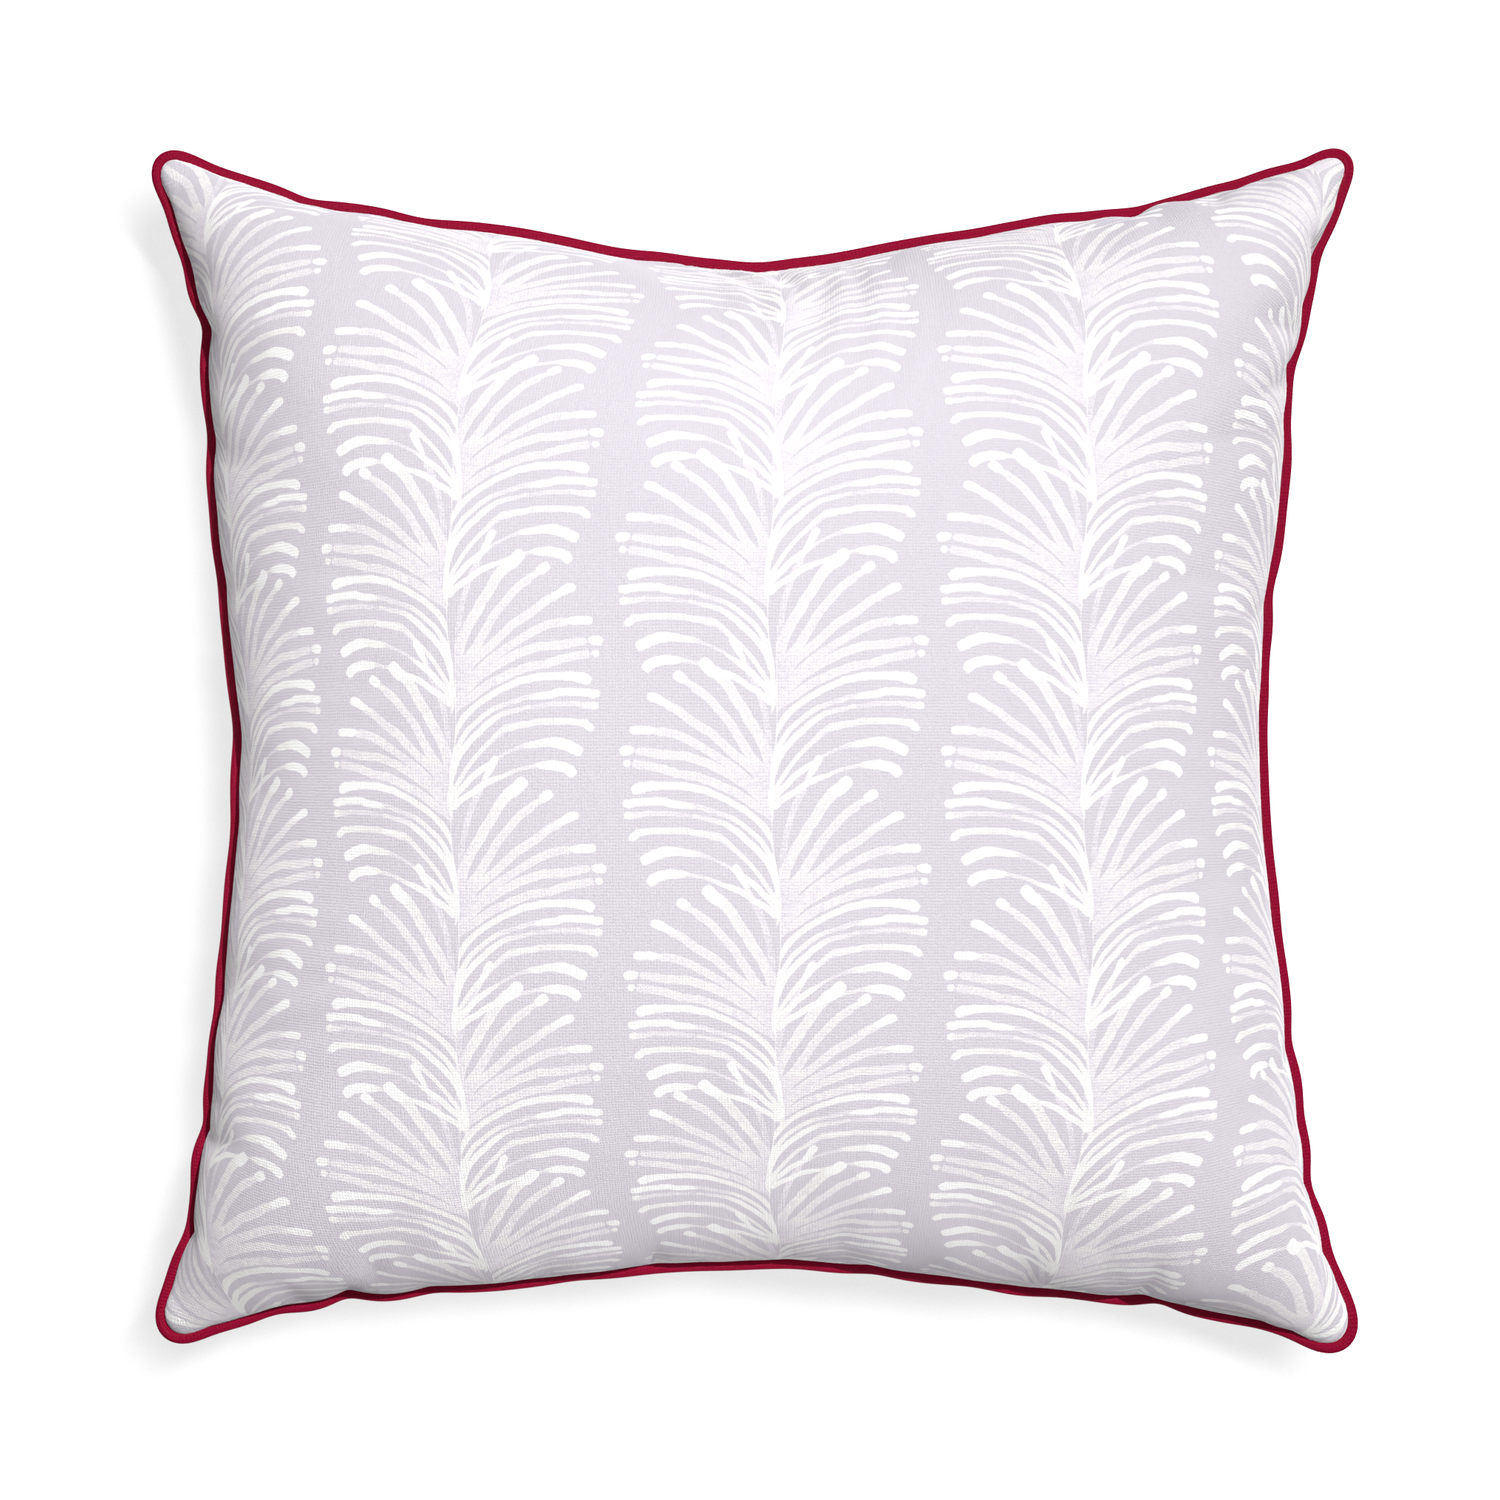 Euro-sham emma lavender custom pillow with raspberry piping on white background